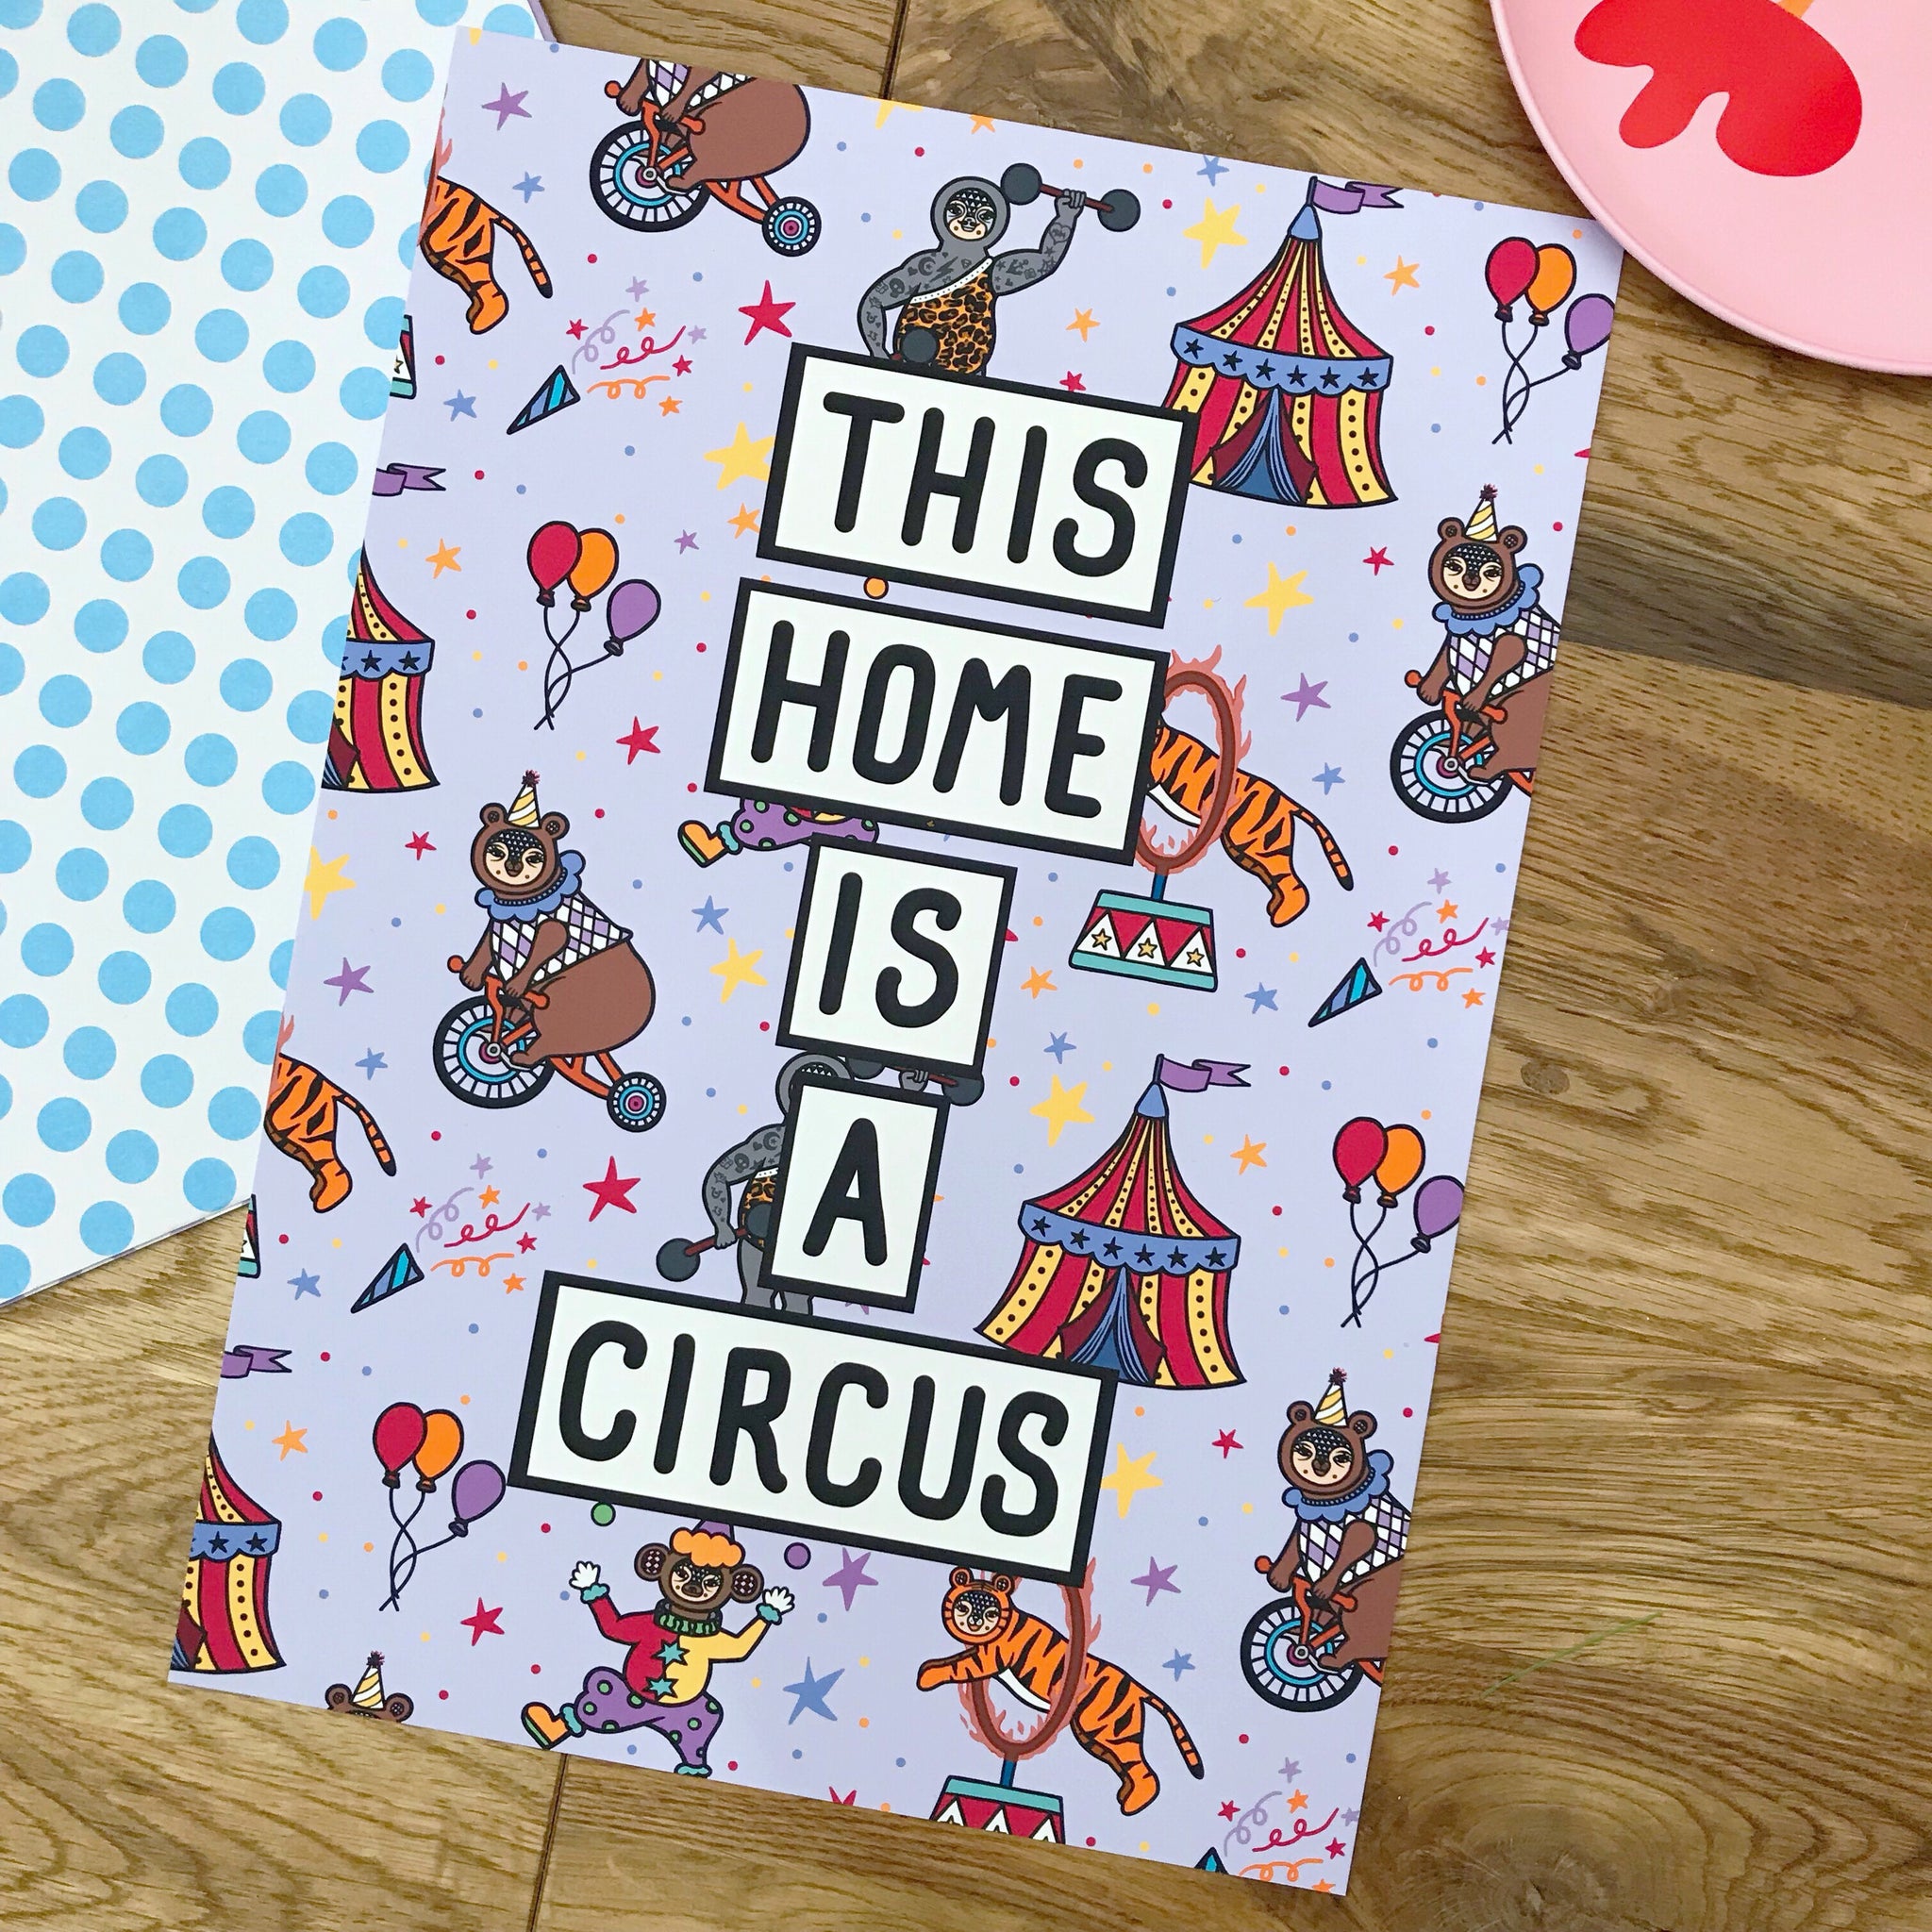 Home Is A Circus Print